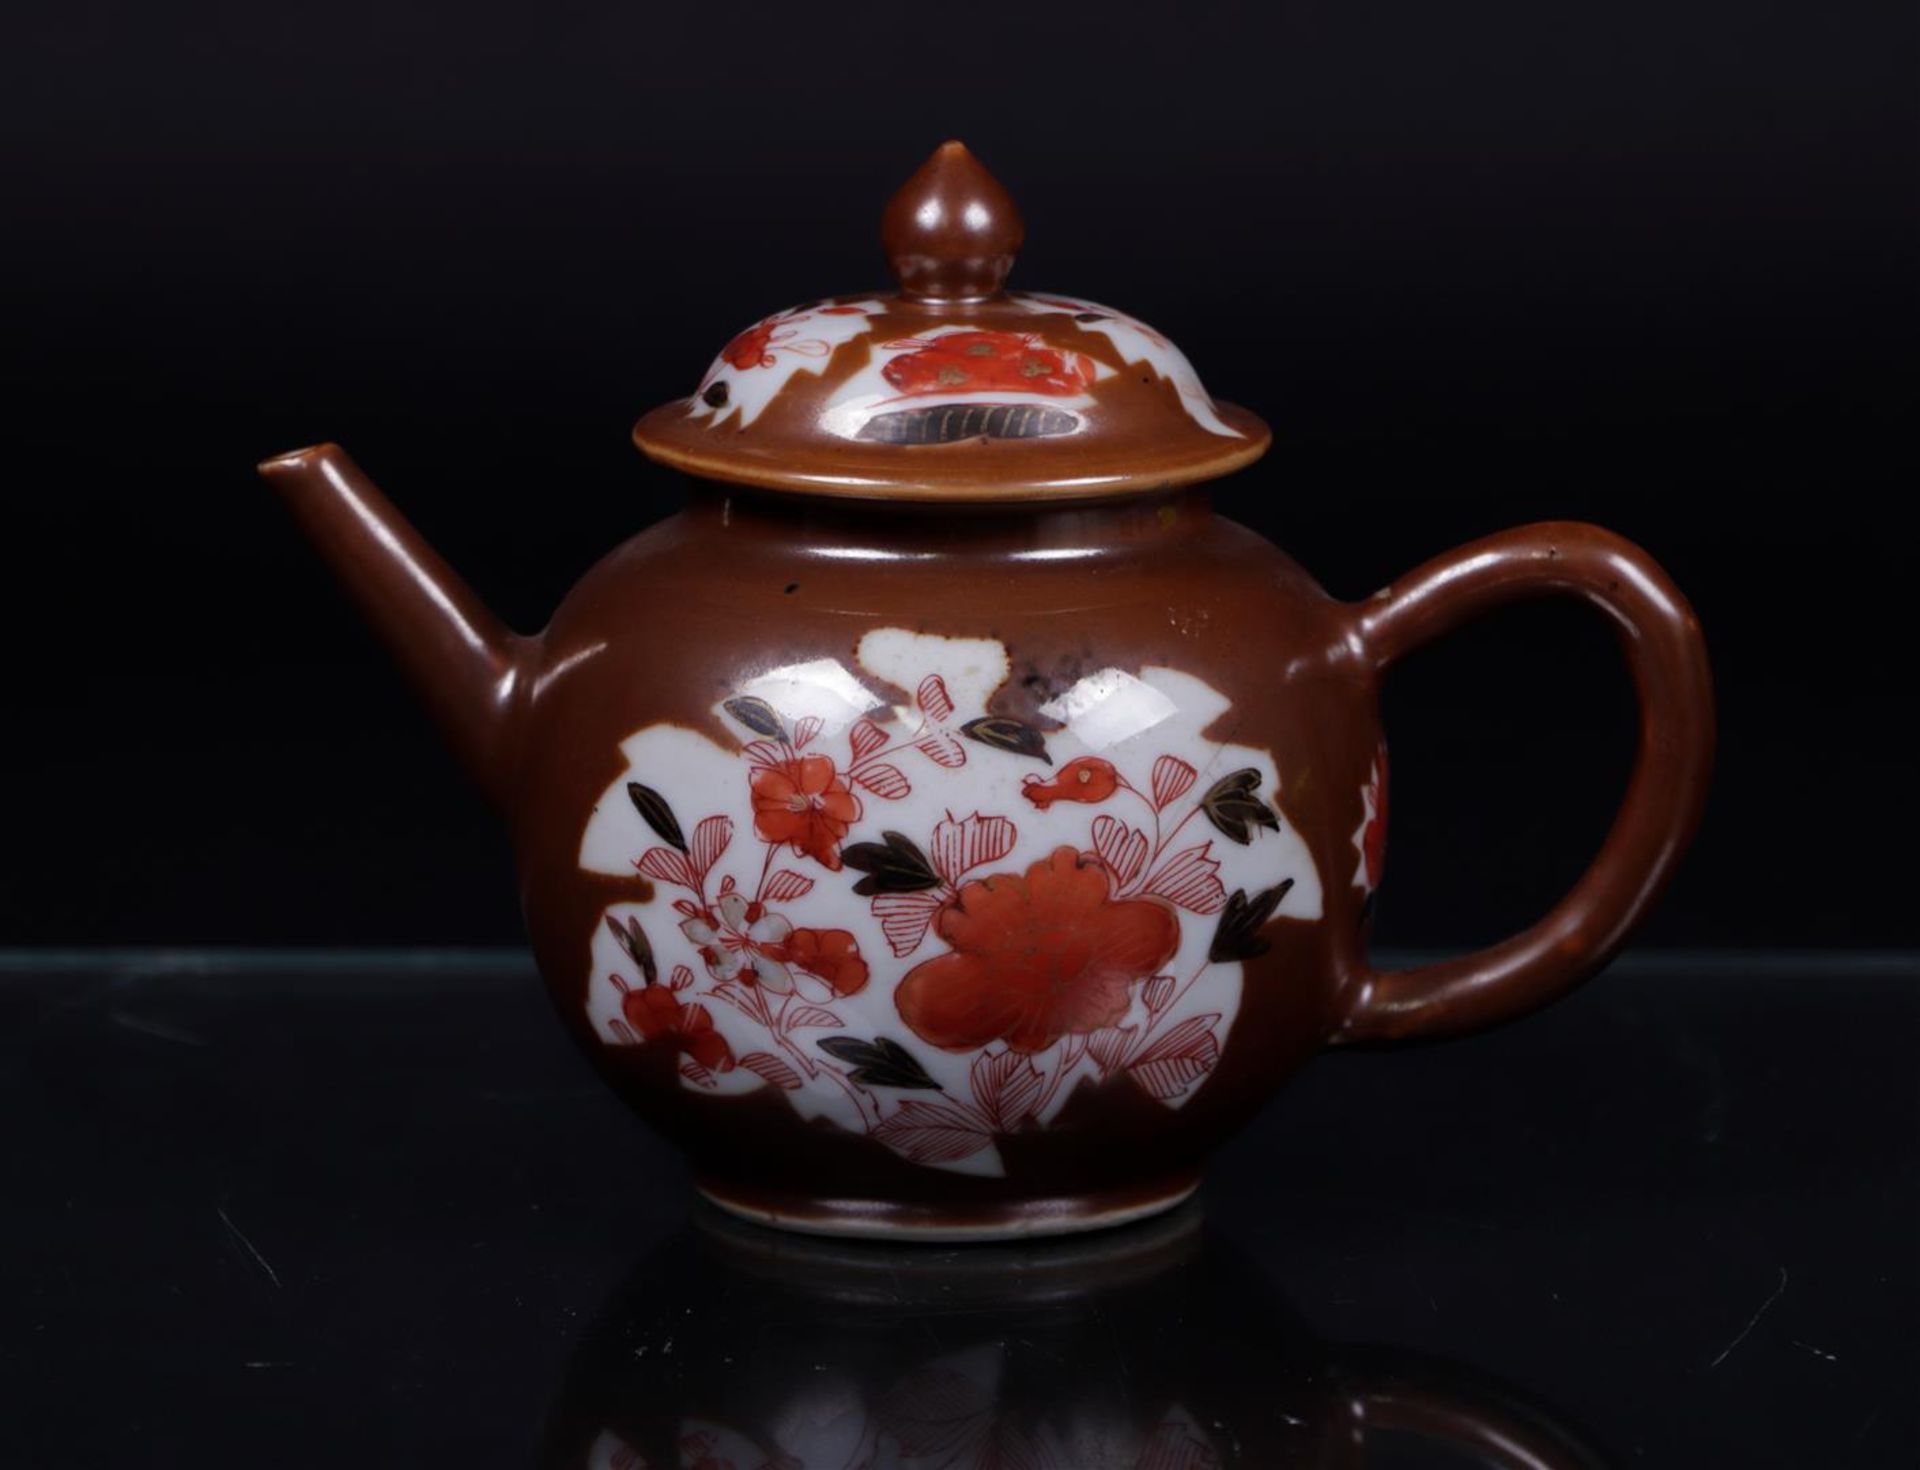 A porcelain teapot, Capuchin/Famille Rose leaf/bed decor. China, 18th century.
17 x 14 cm. - Image 2 of 3